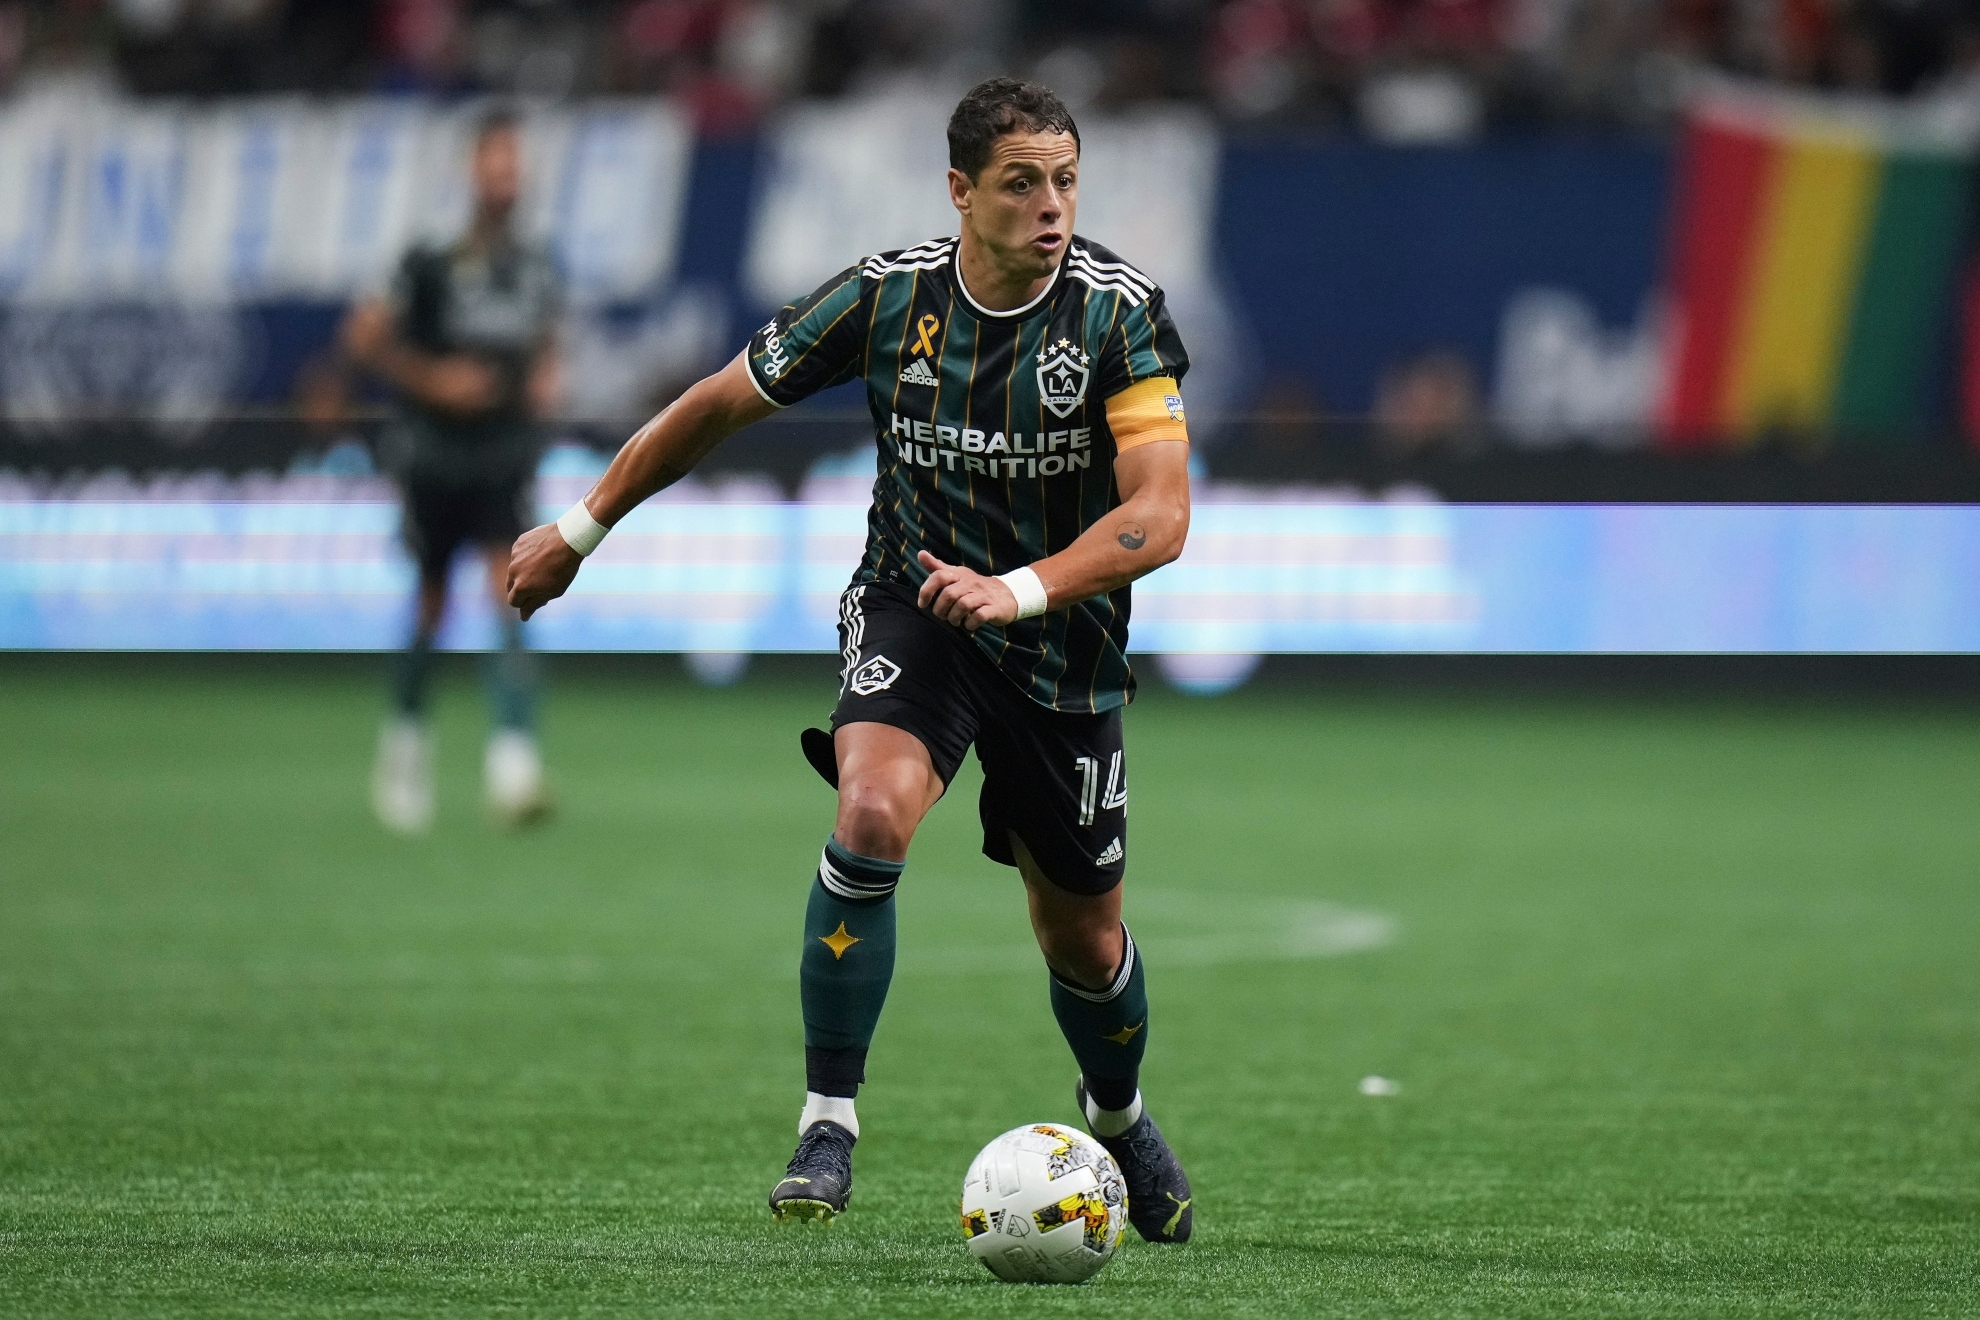 LA Galaxy's Javier Hernandez controls the ball during the first half of the team's MLS soccer match against the Vancouver Whitecaps on Wednesday, Sept. 14, 2022, in Vancouver, British Columbia / AP